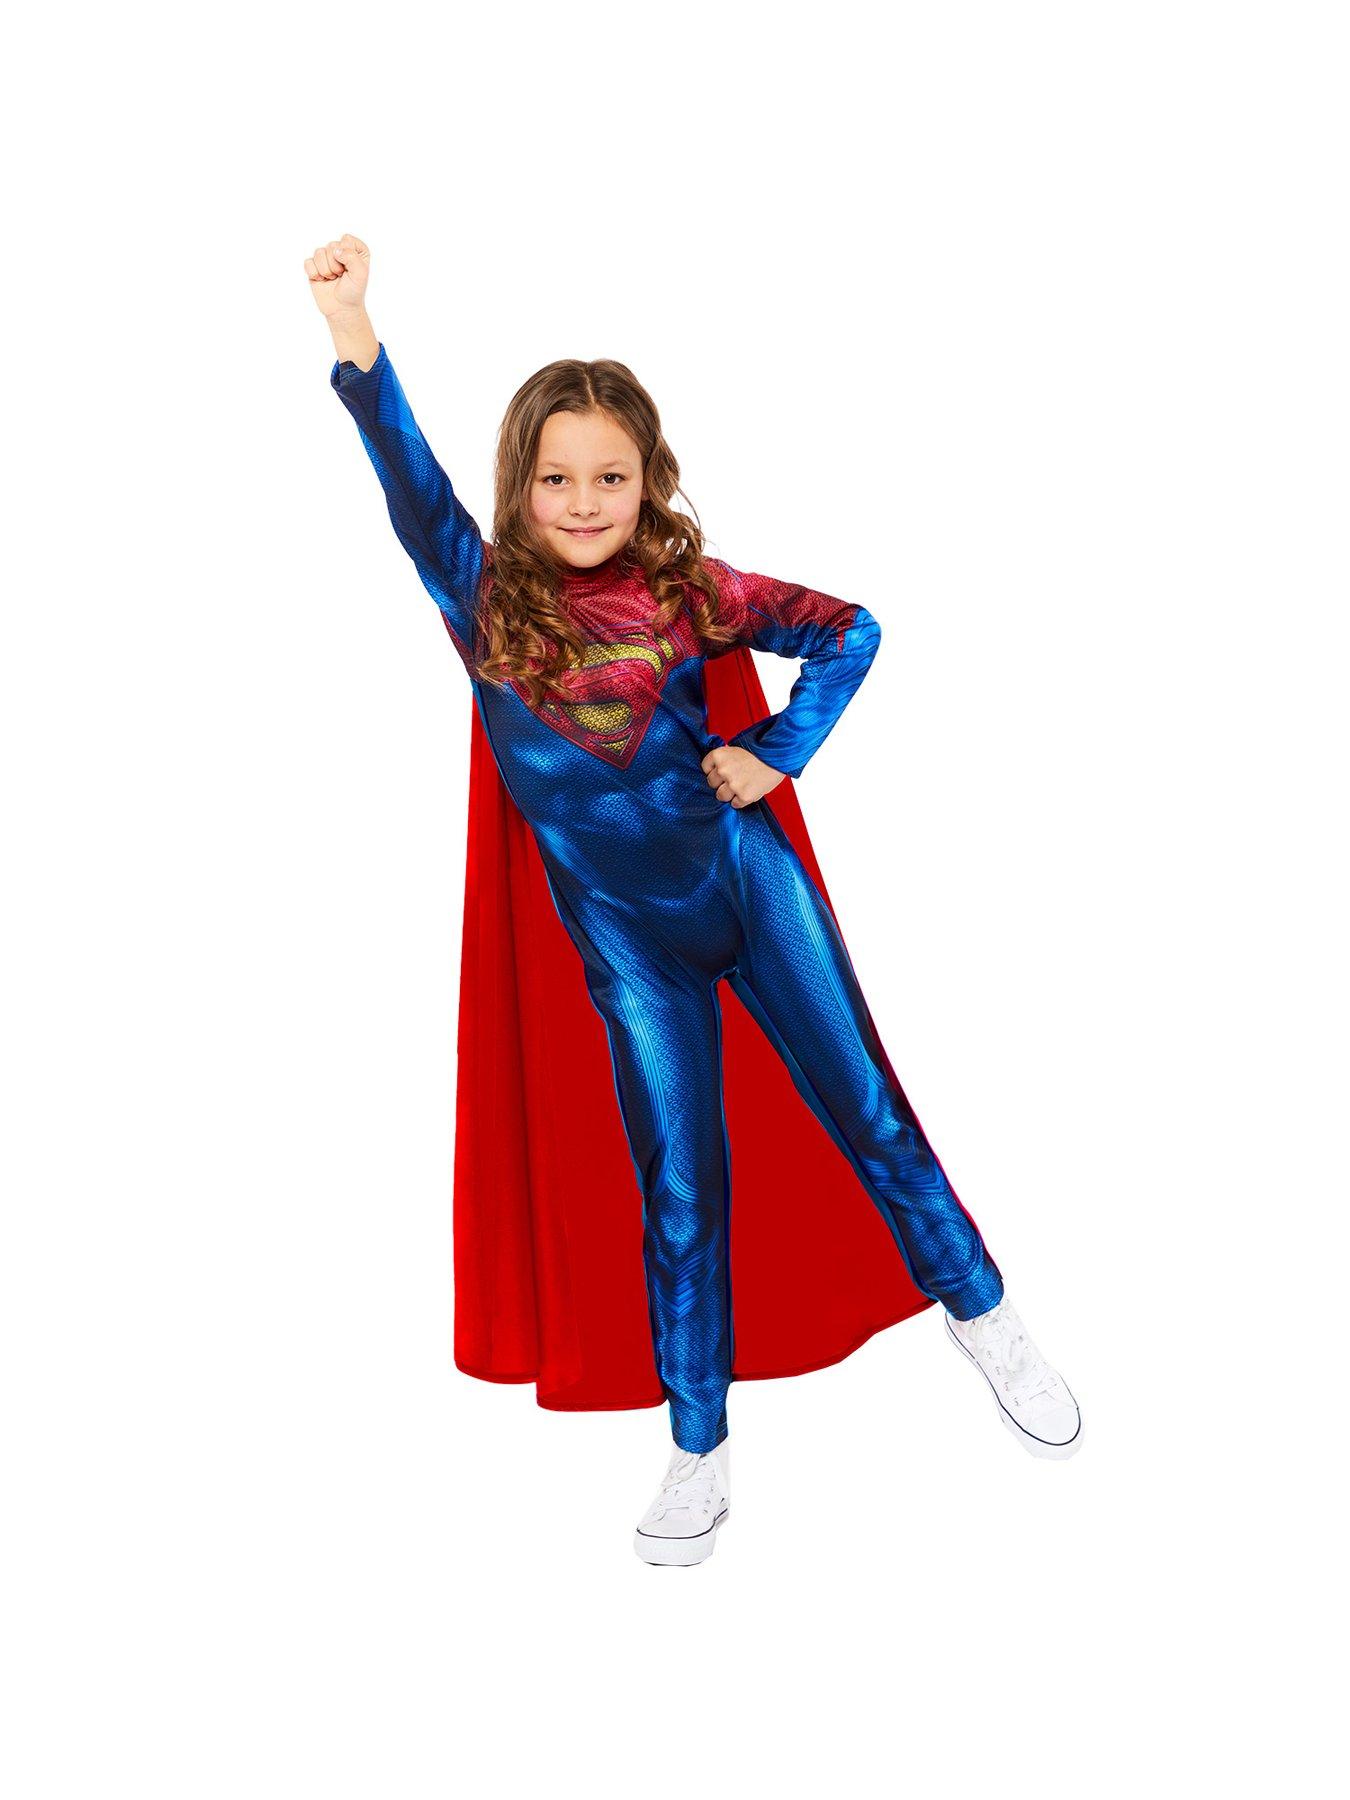 superman costumes for girls